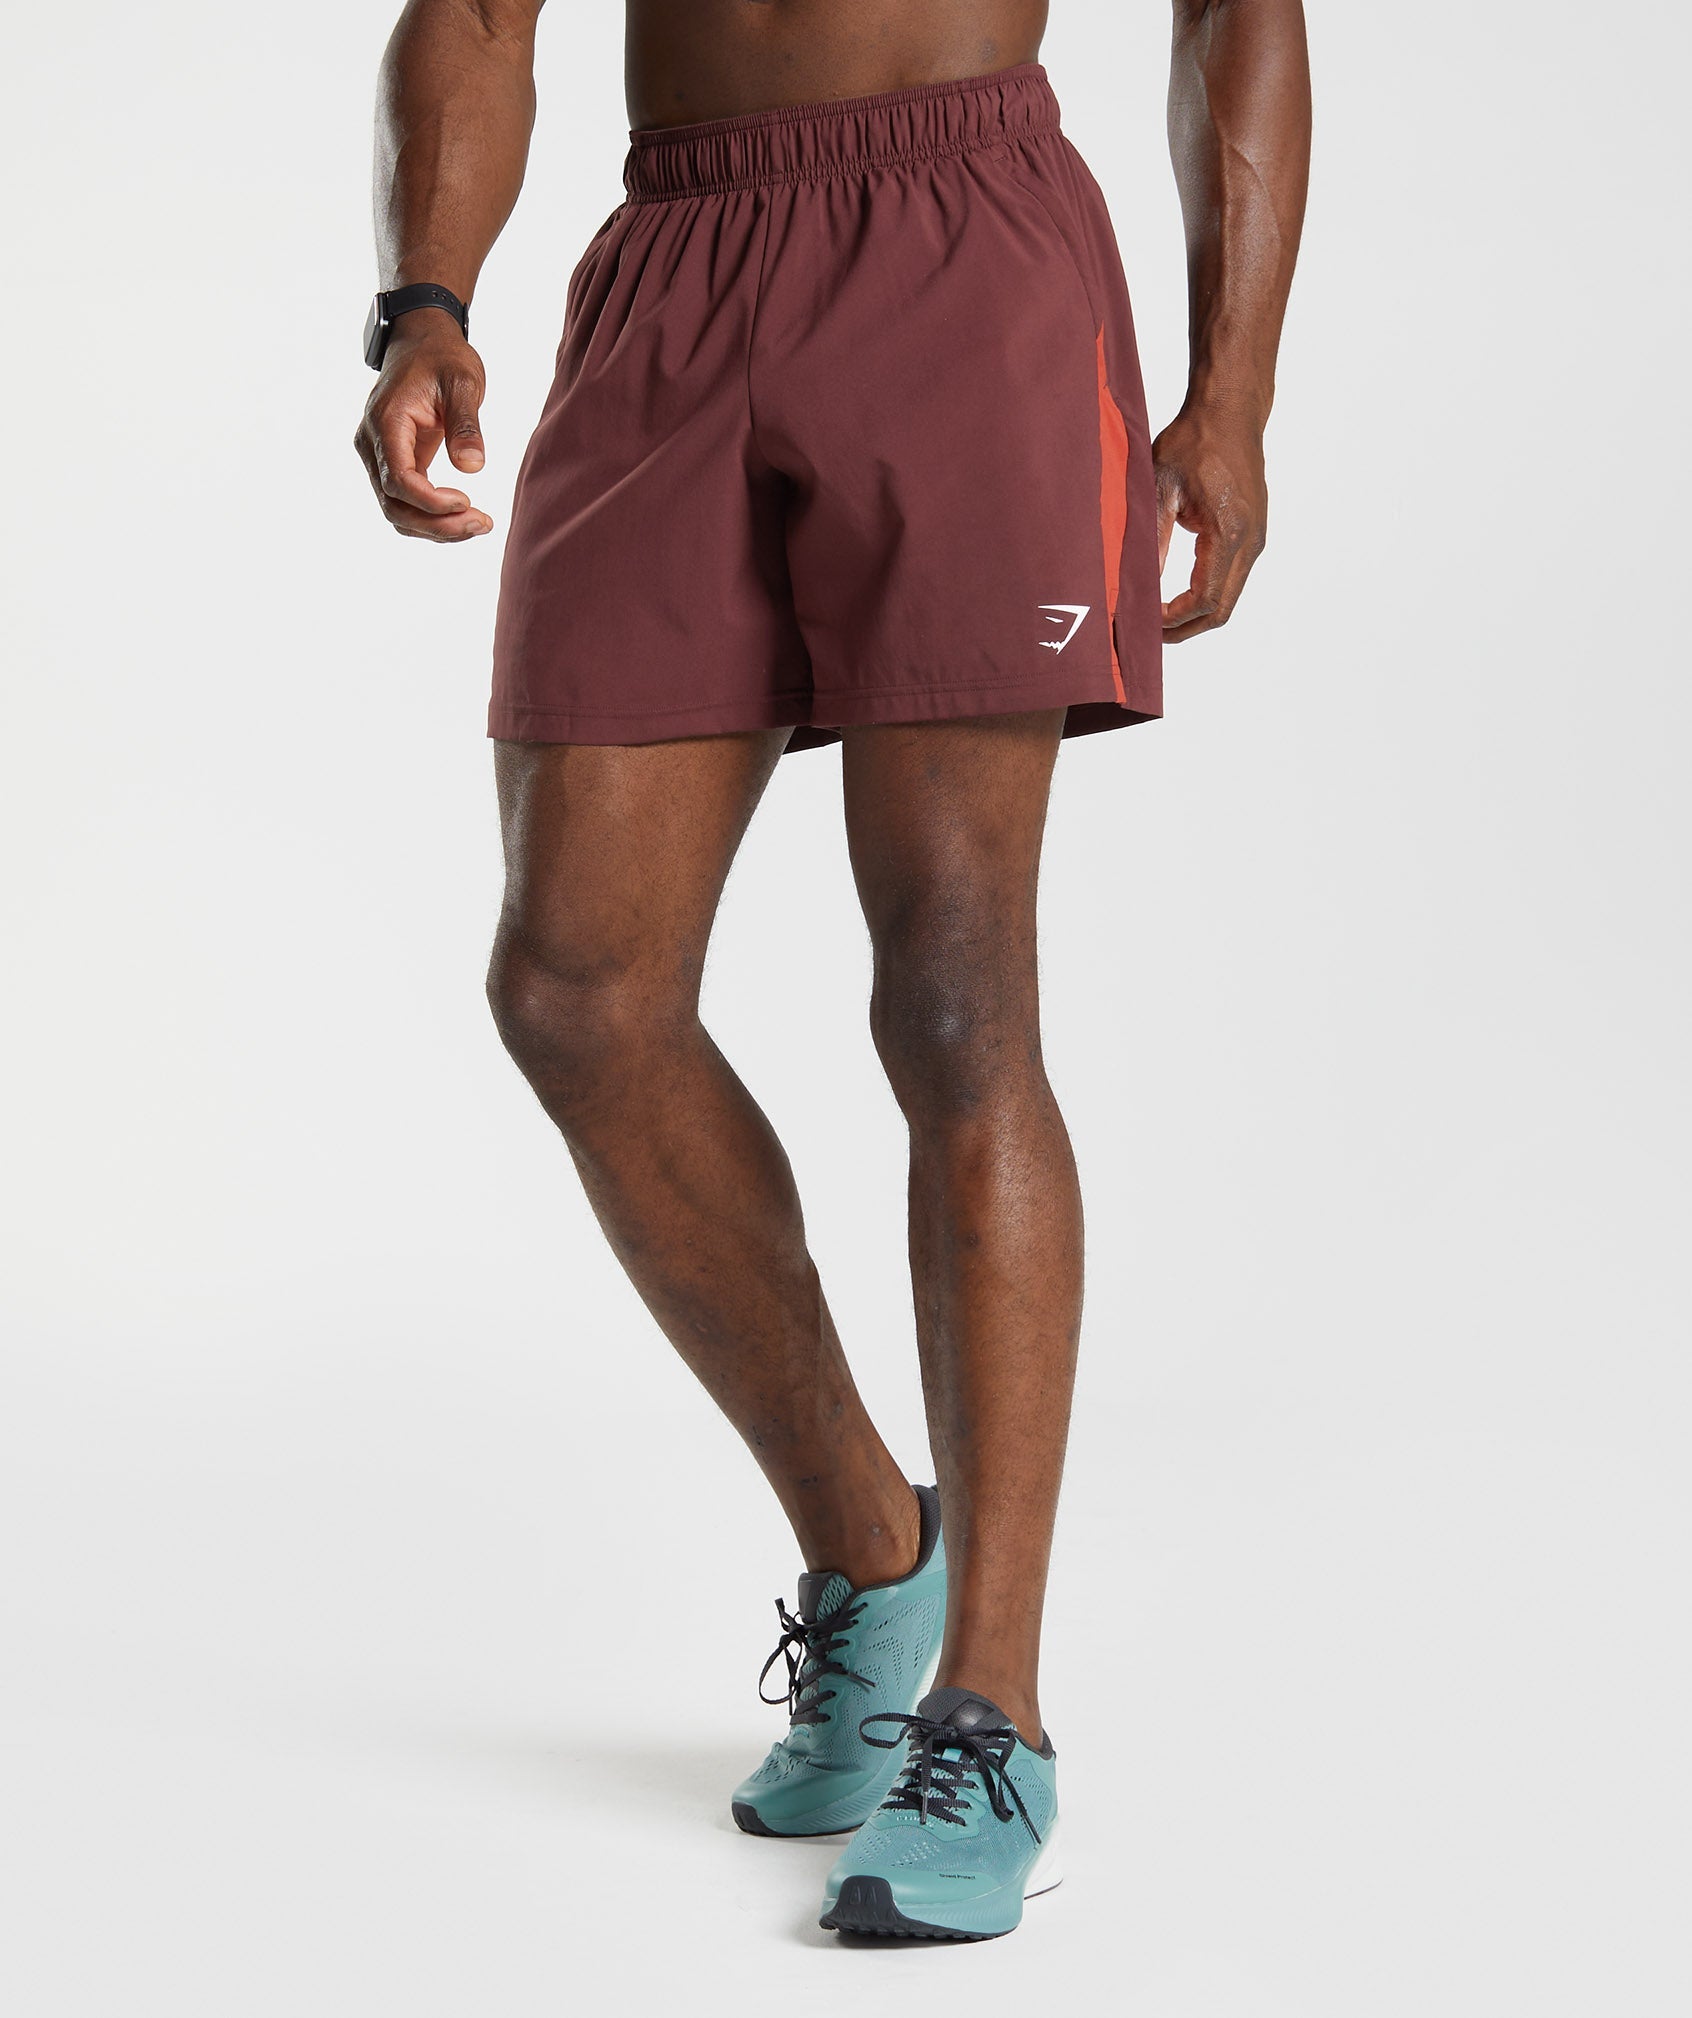 Sport Shorts in Baked Maroon/Salsa Red